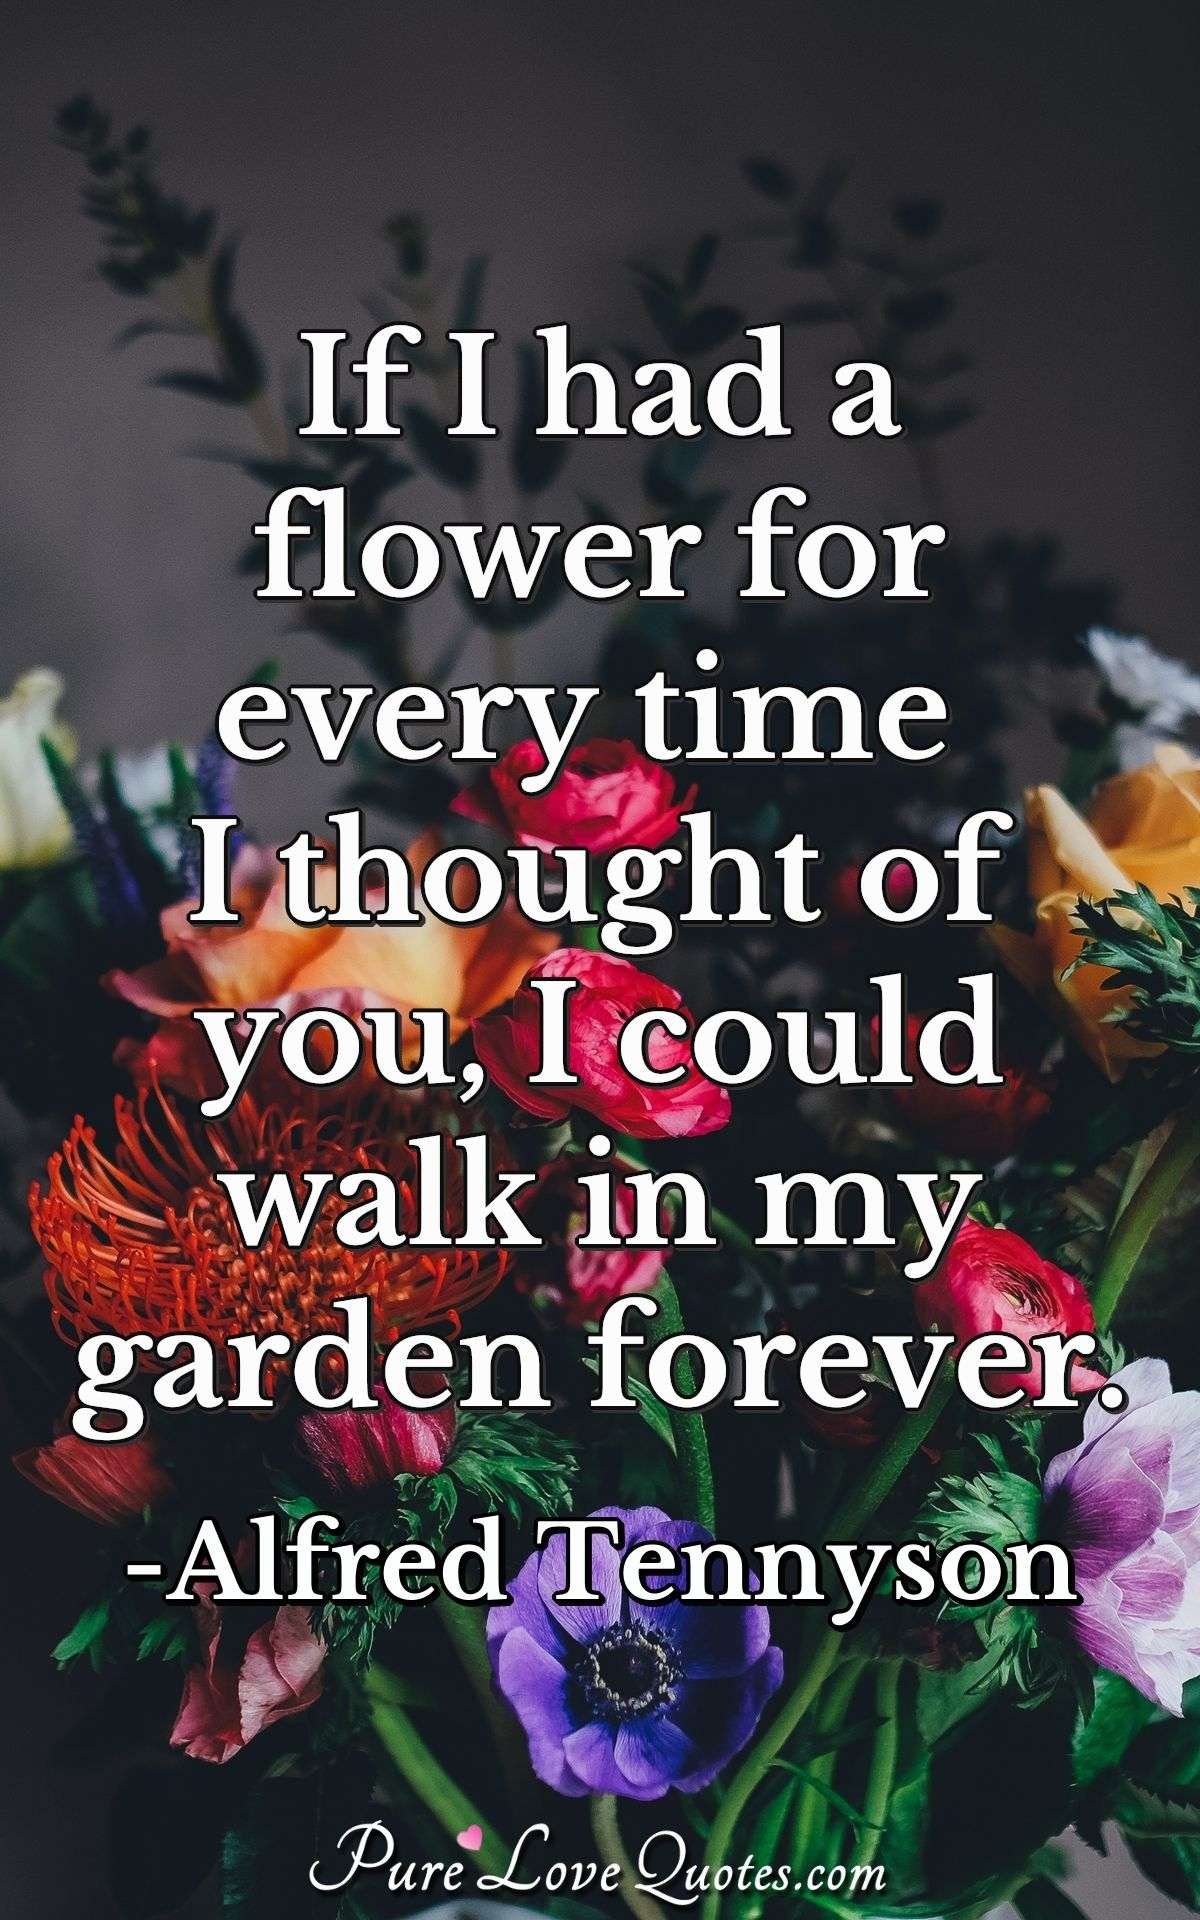 If I had a flower for every time I thought of you, I could walk in my garden forever. - Alfred Tennyson